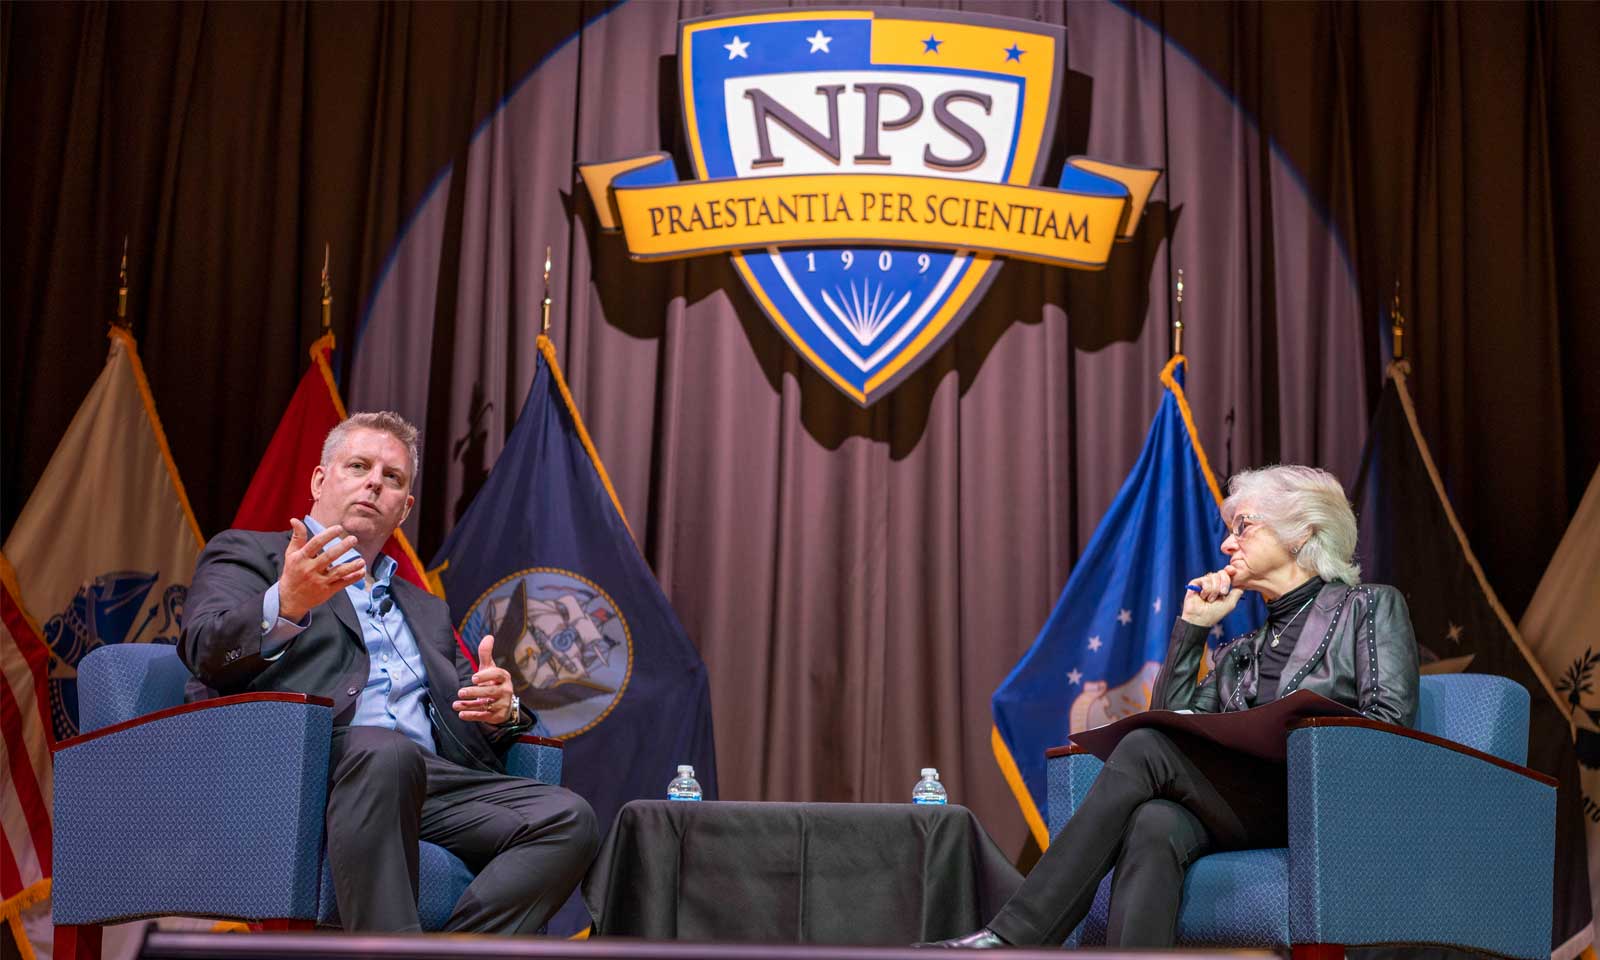 Microsoft Executive Discusses Fifth Domain Competition, Partnerships During NPS Guest Lecture